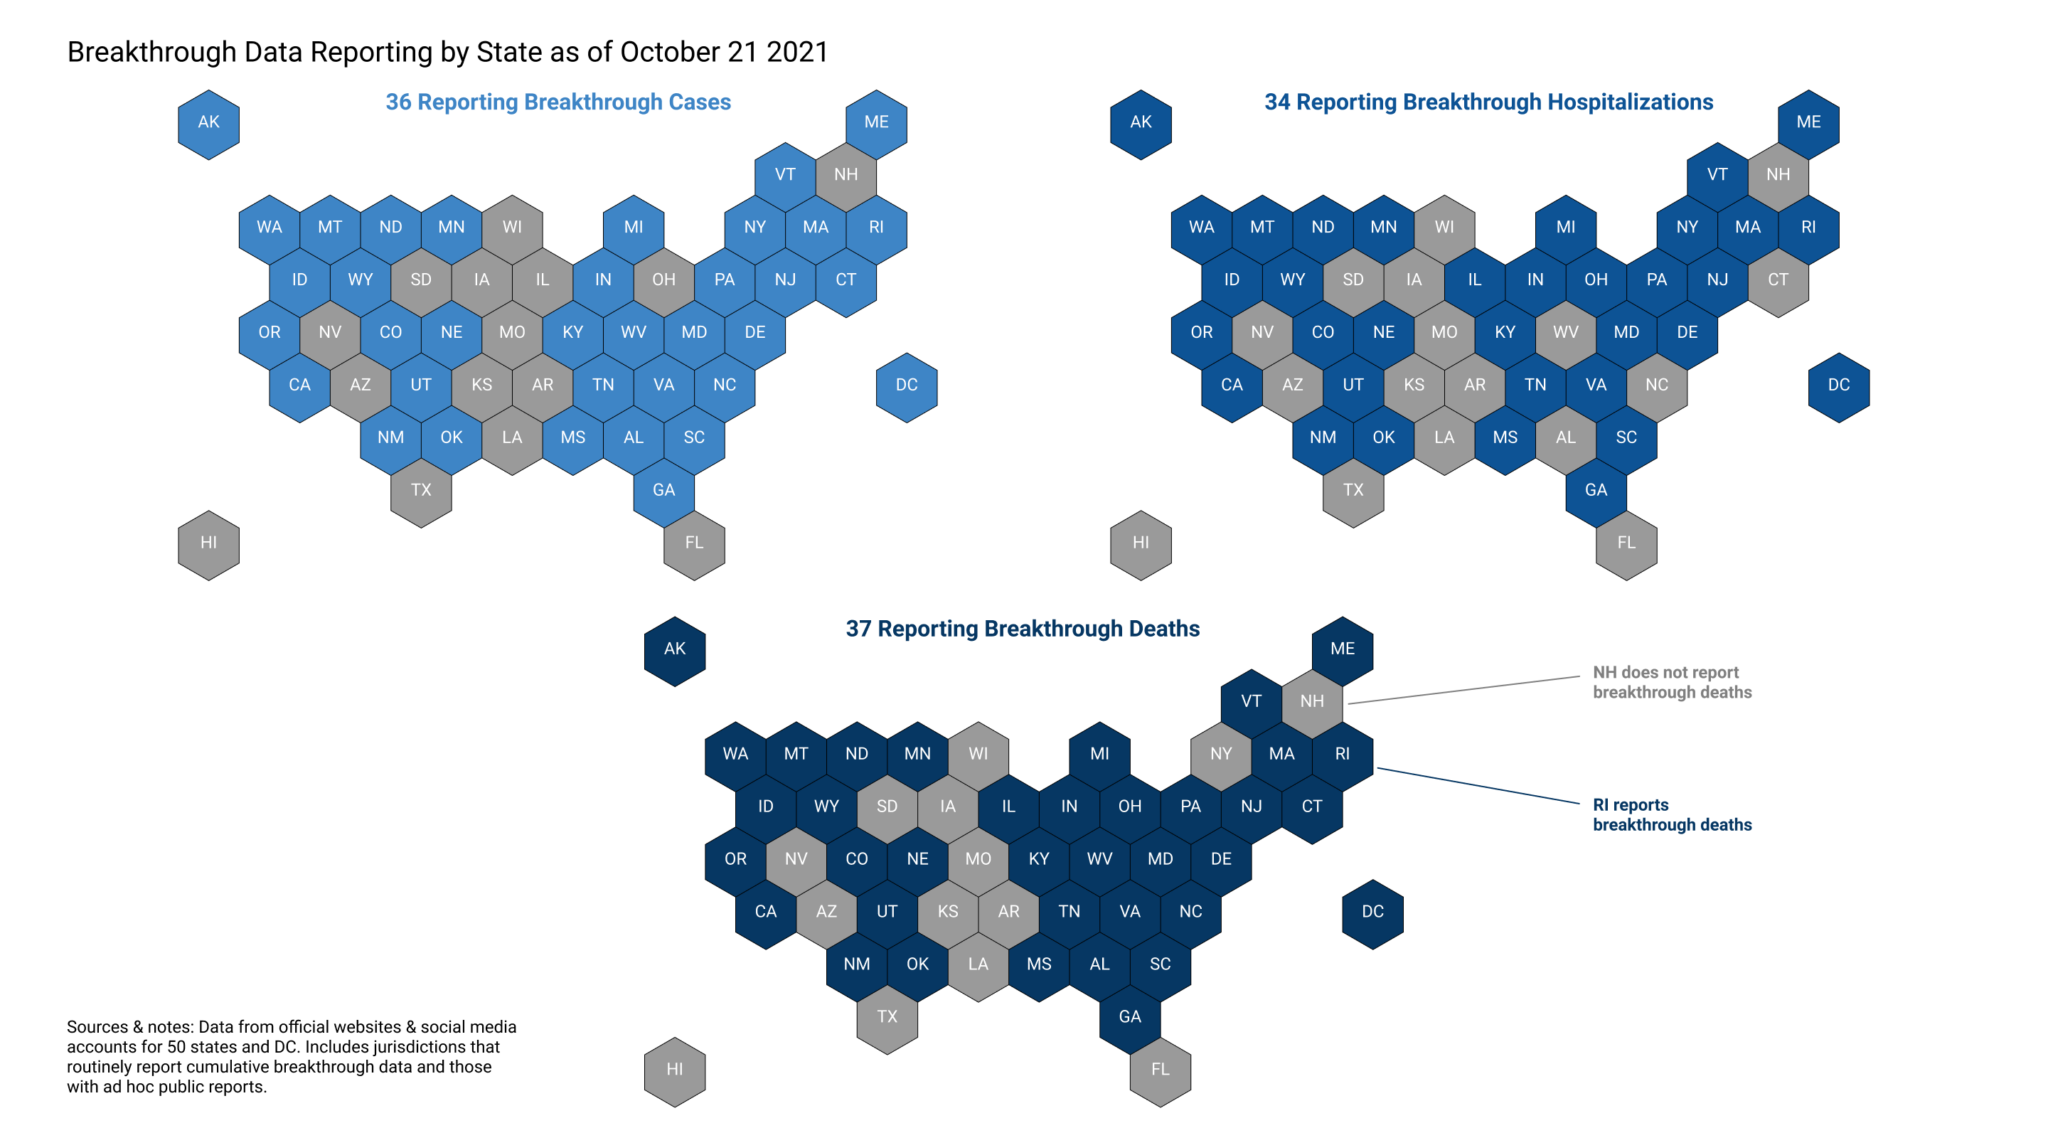 3 hexmaps showing US states that report breakthrough cases, hospital admissions, or deaths as of Oct 21, 2021.